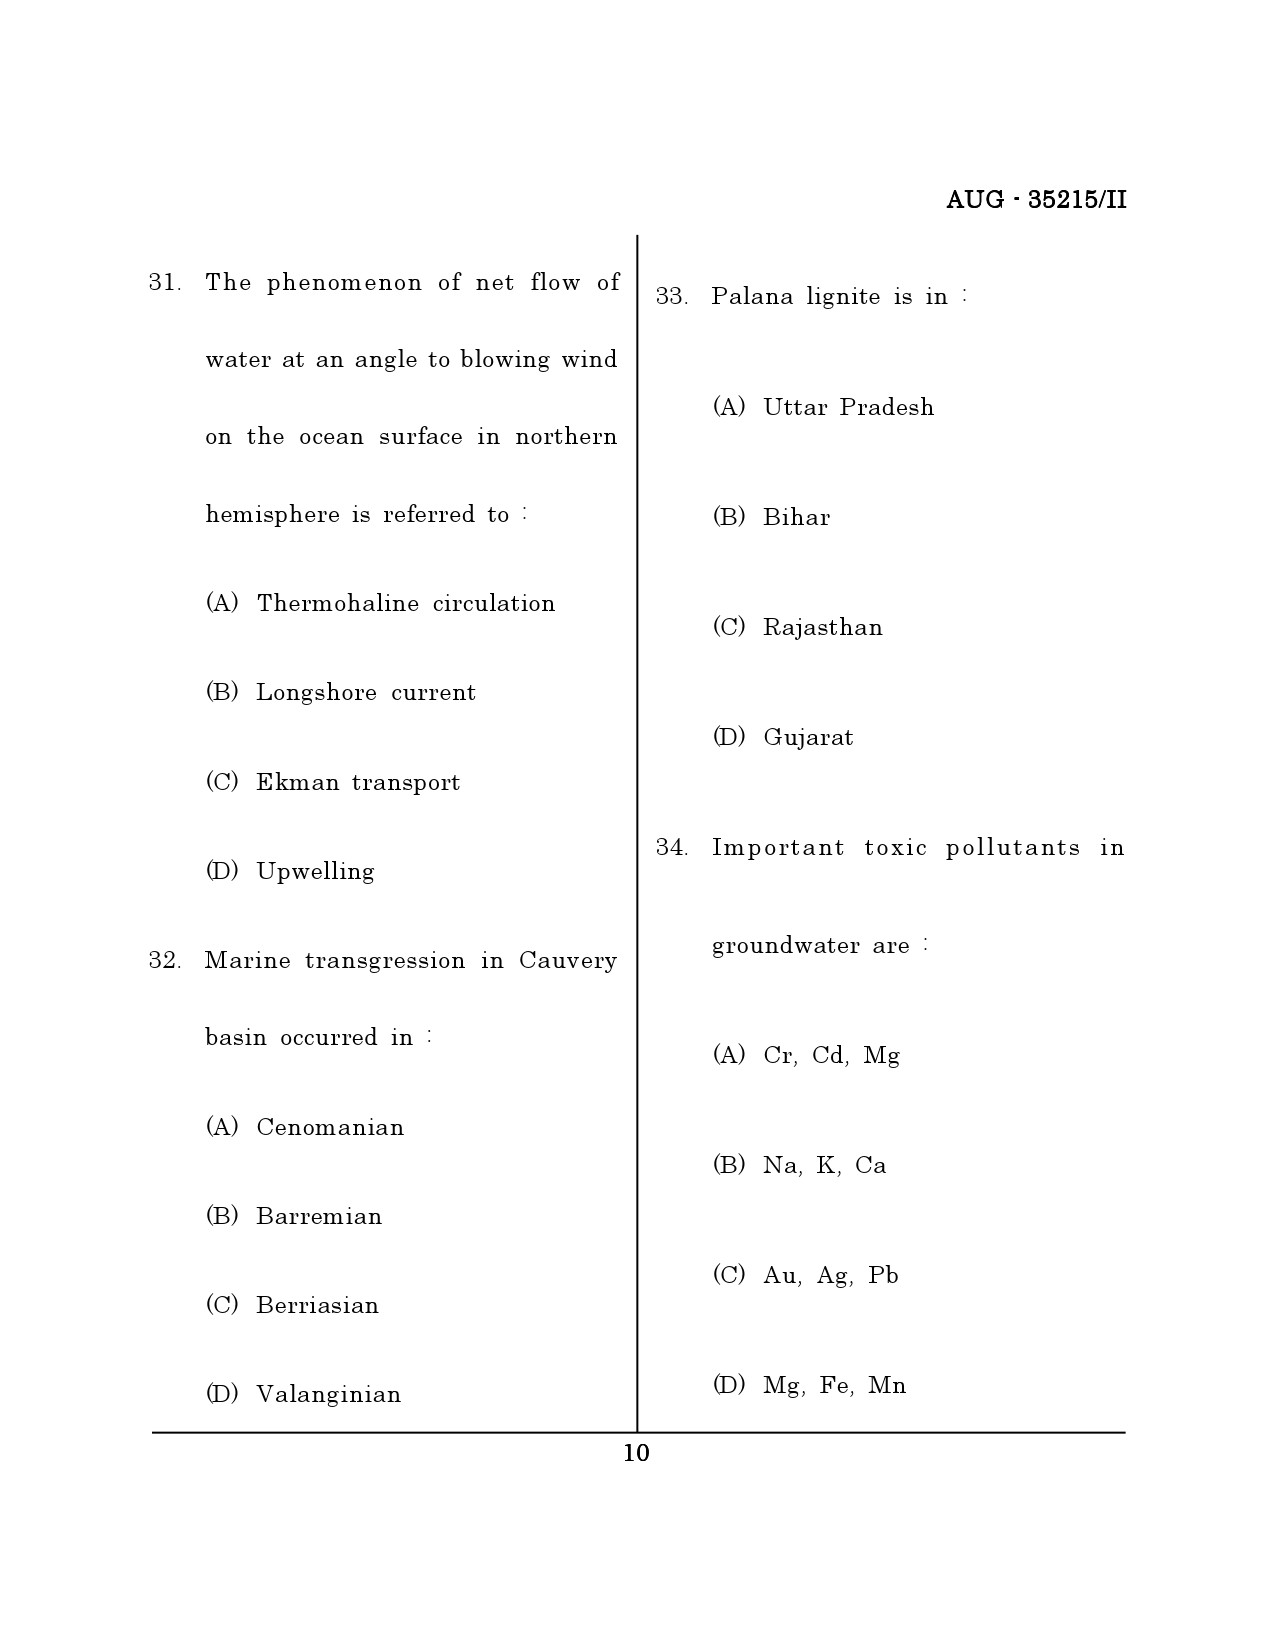 Maharashtra SET Earth Atmospheric Ocean Planetary Science Question Paper II August 2015 9